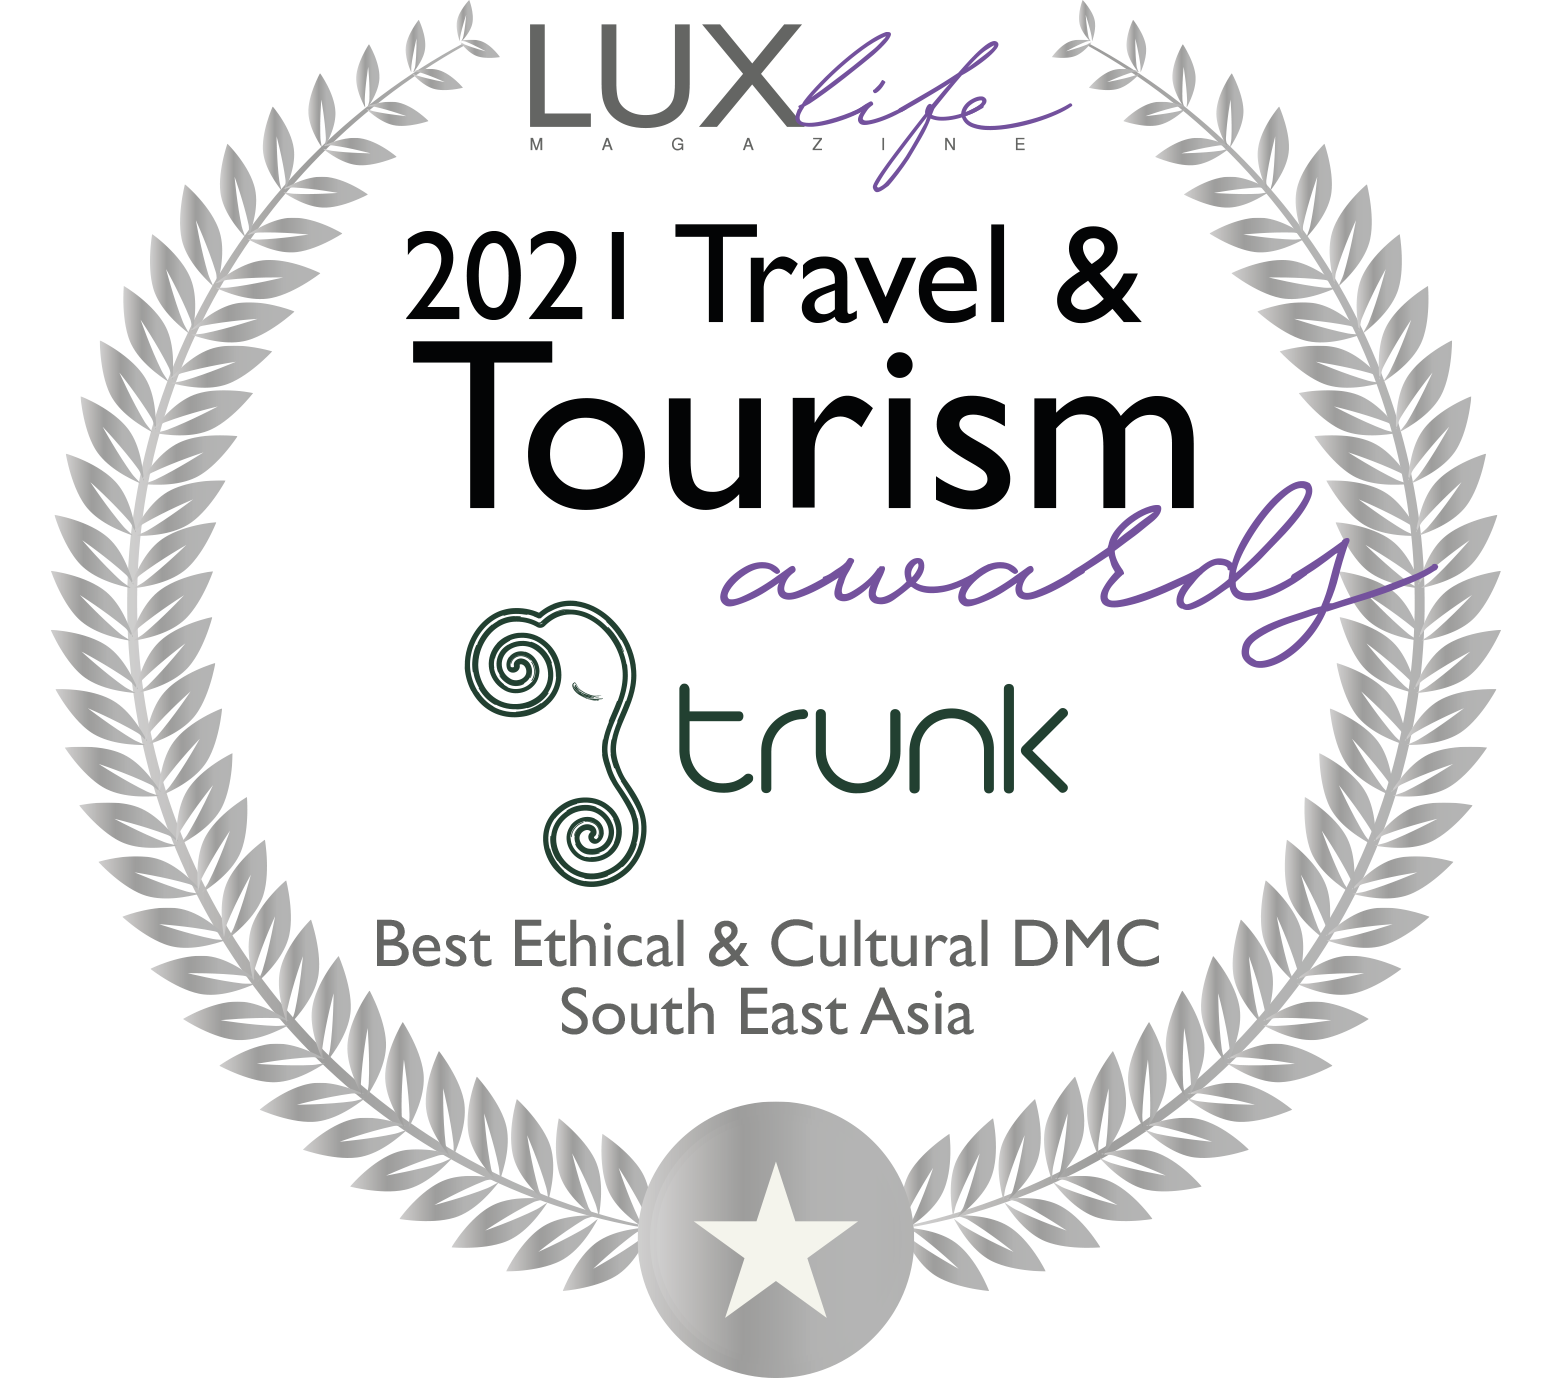 Best Ethical & Cultural DMC for Southeast Asia